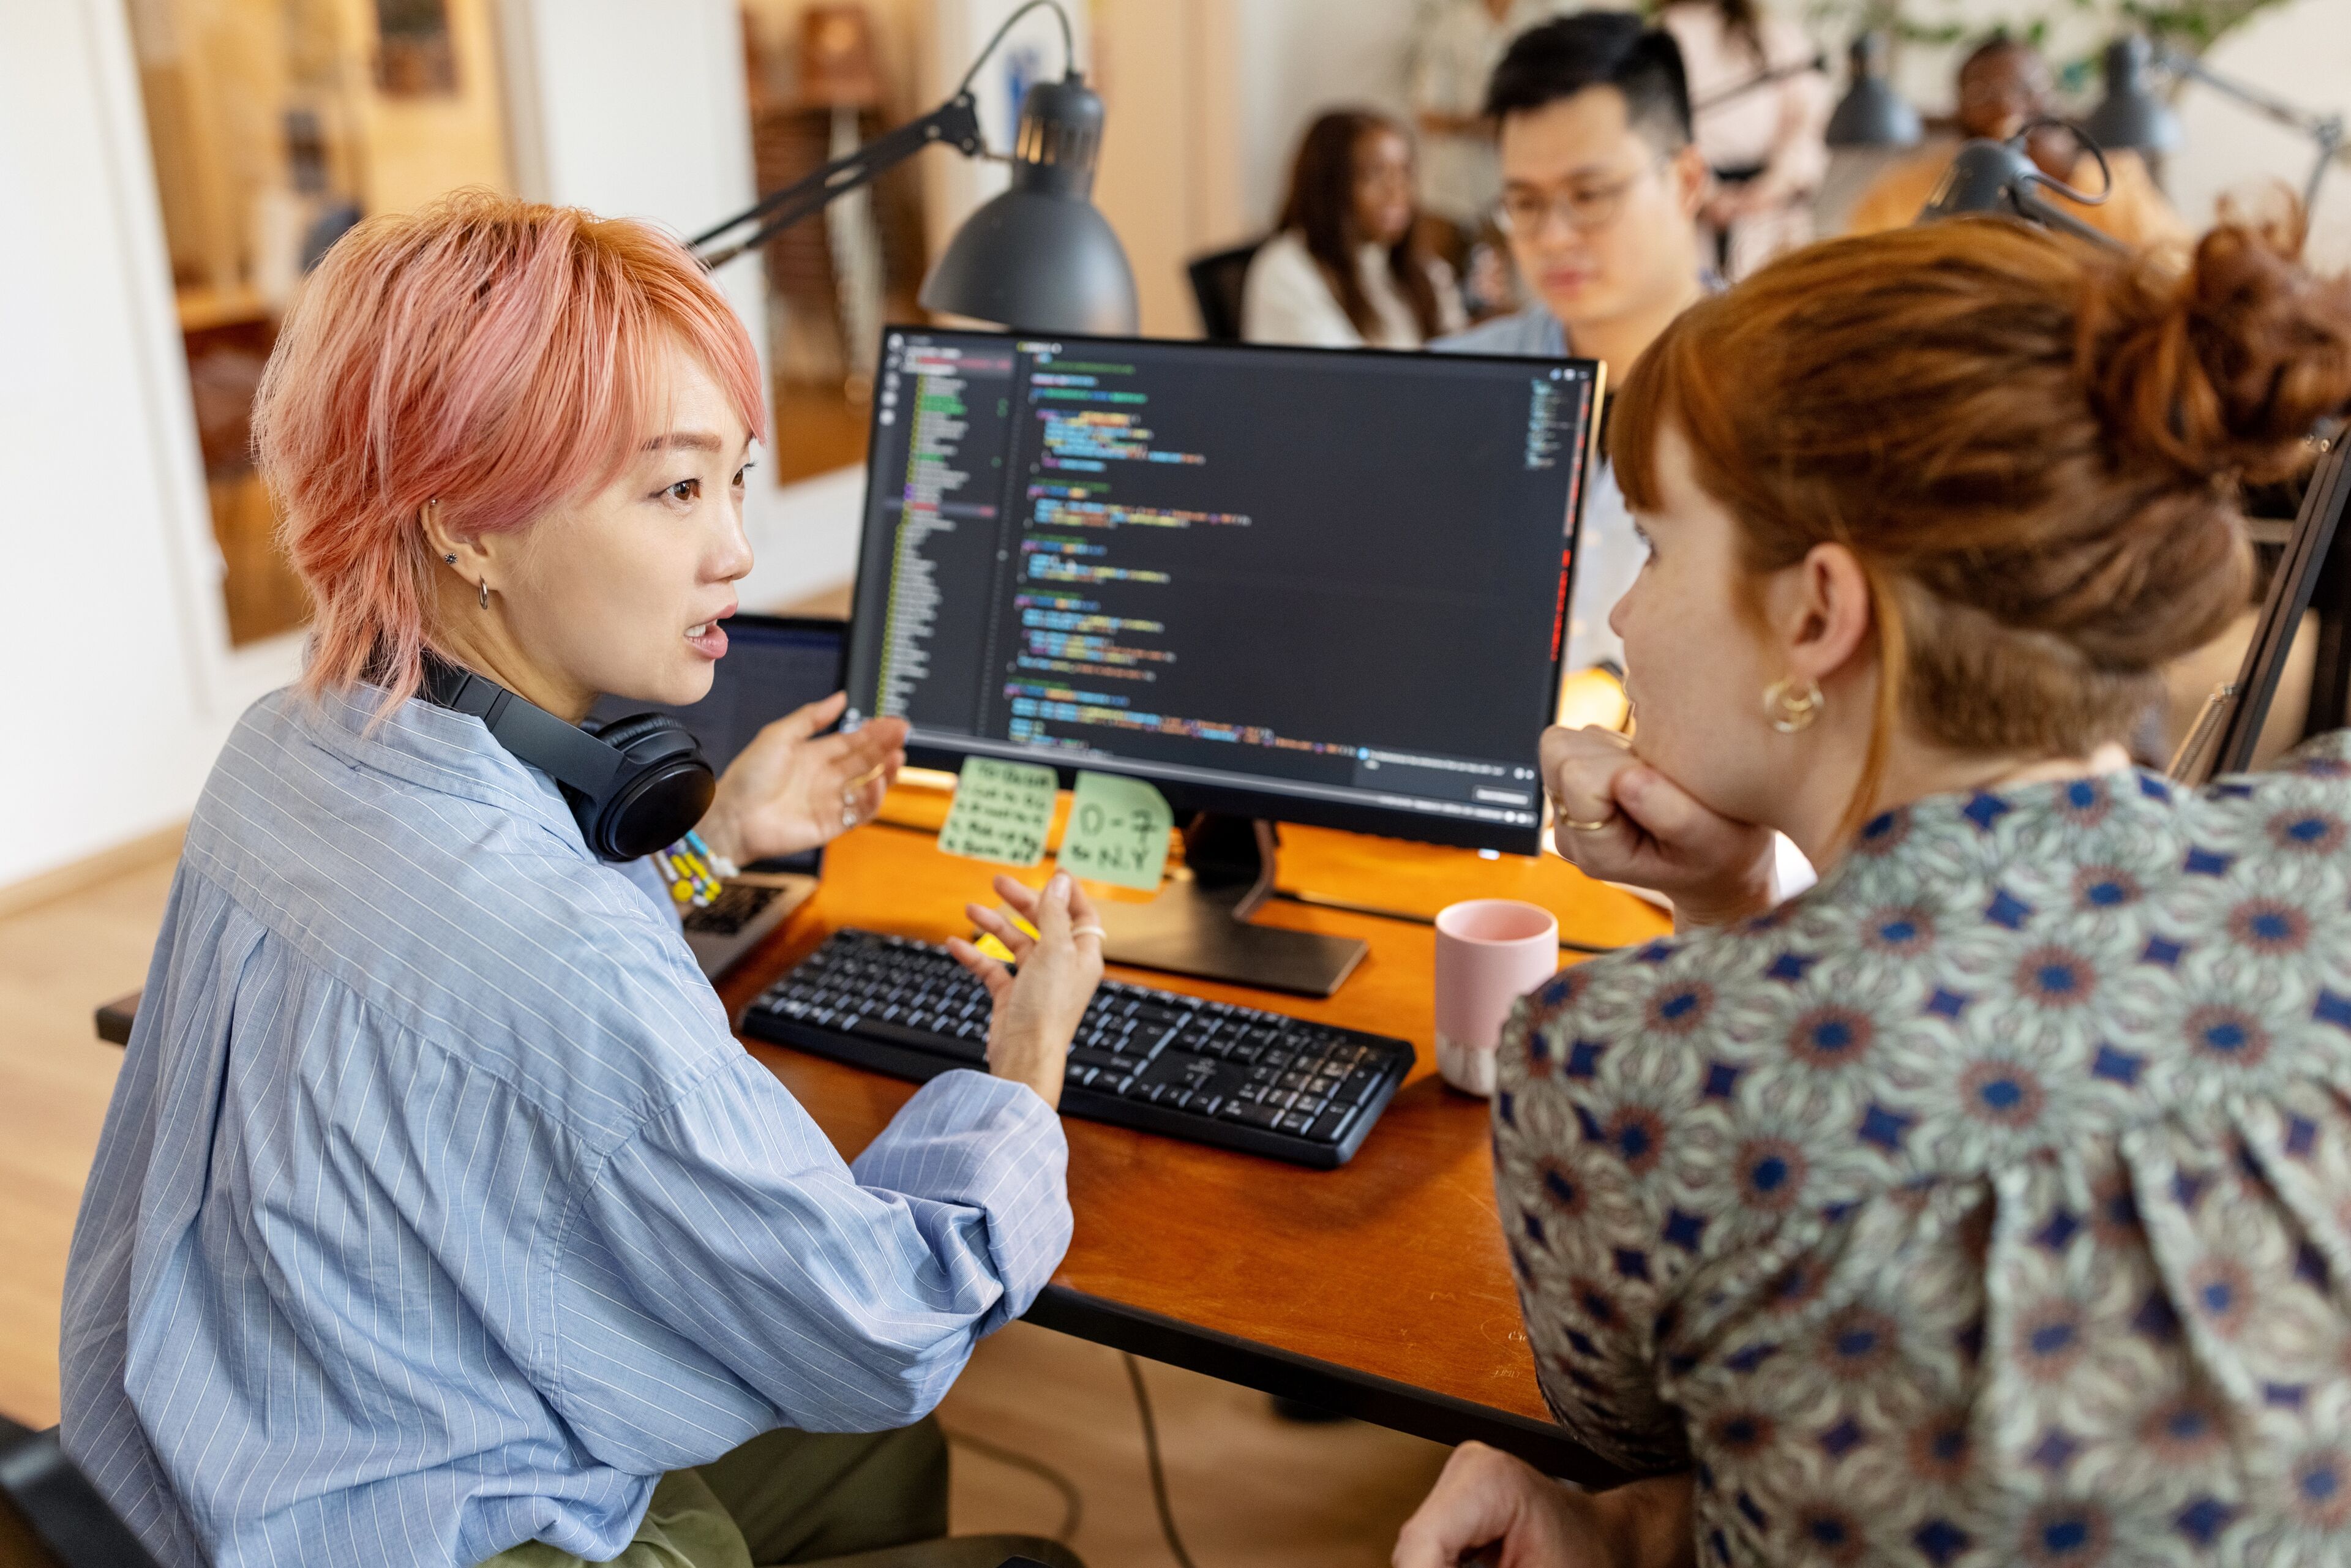 A female developer with pink hair discussing code with a colleague in a busy office setting.